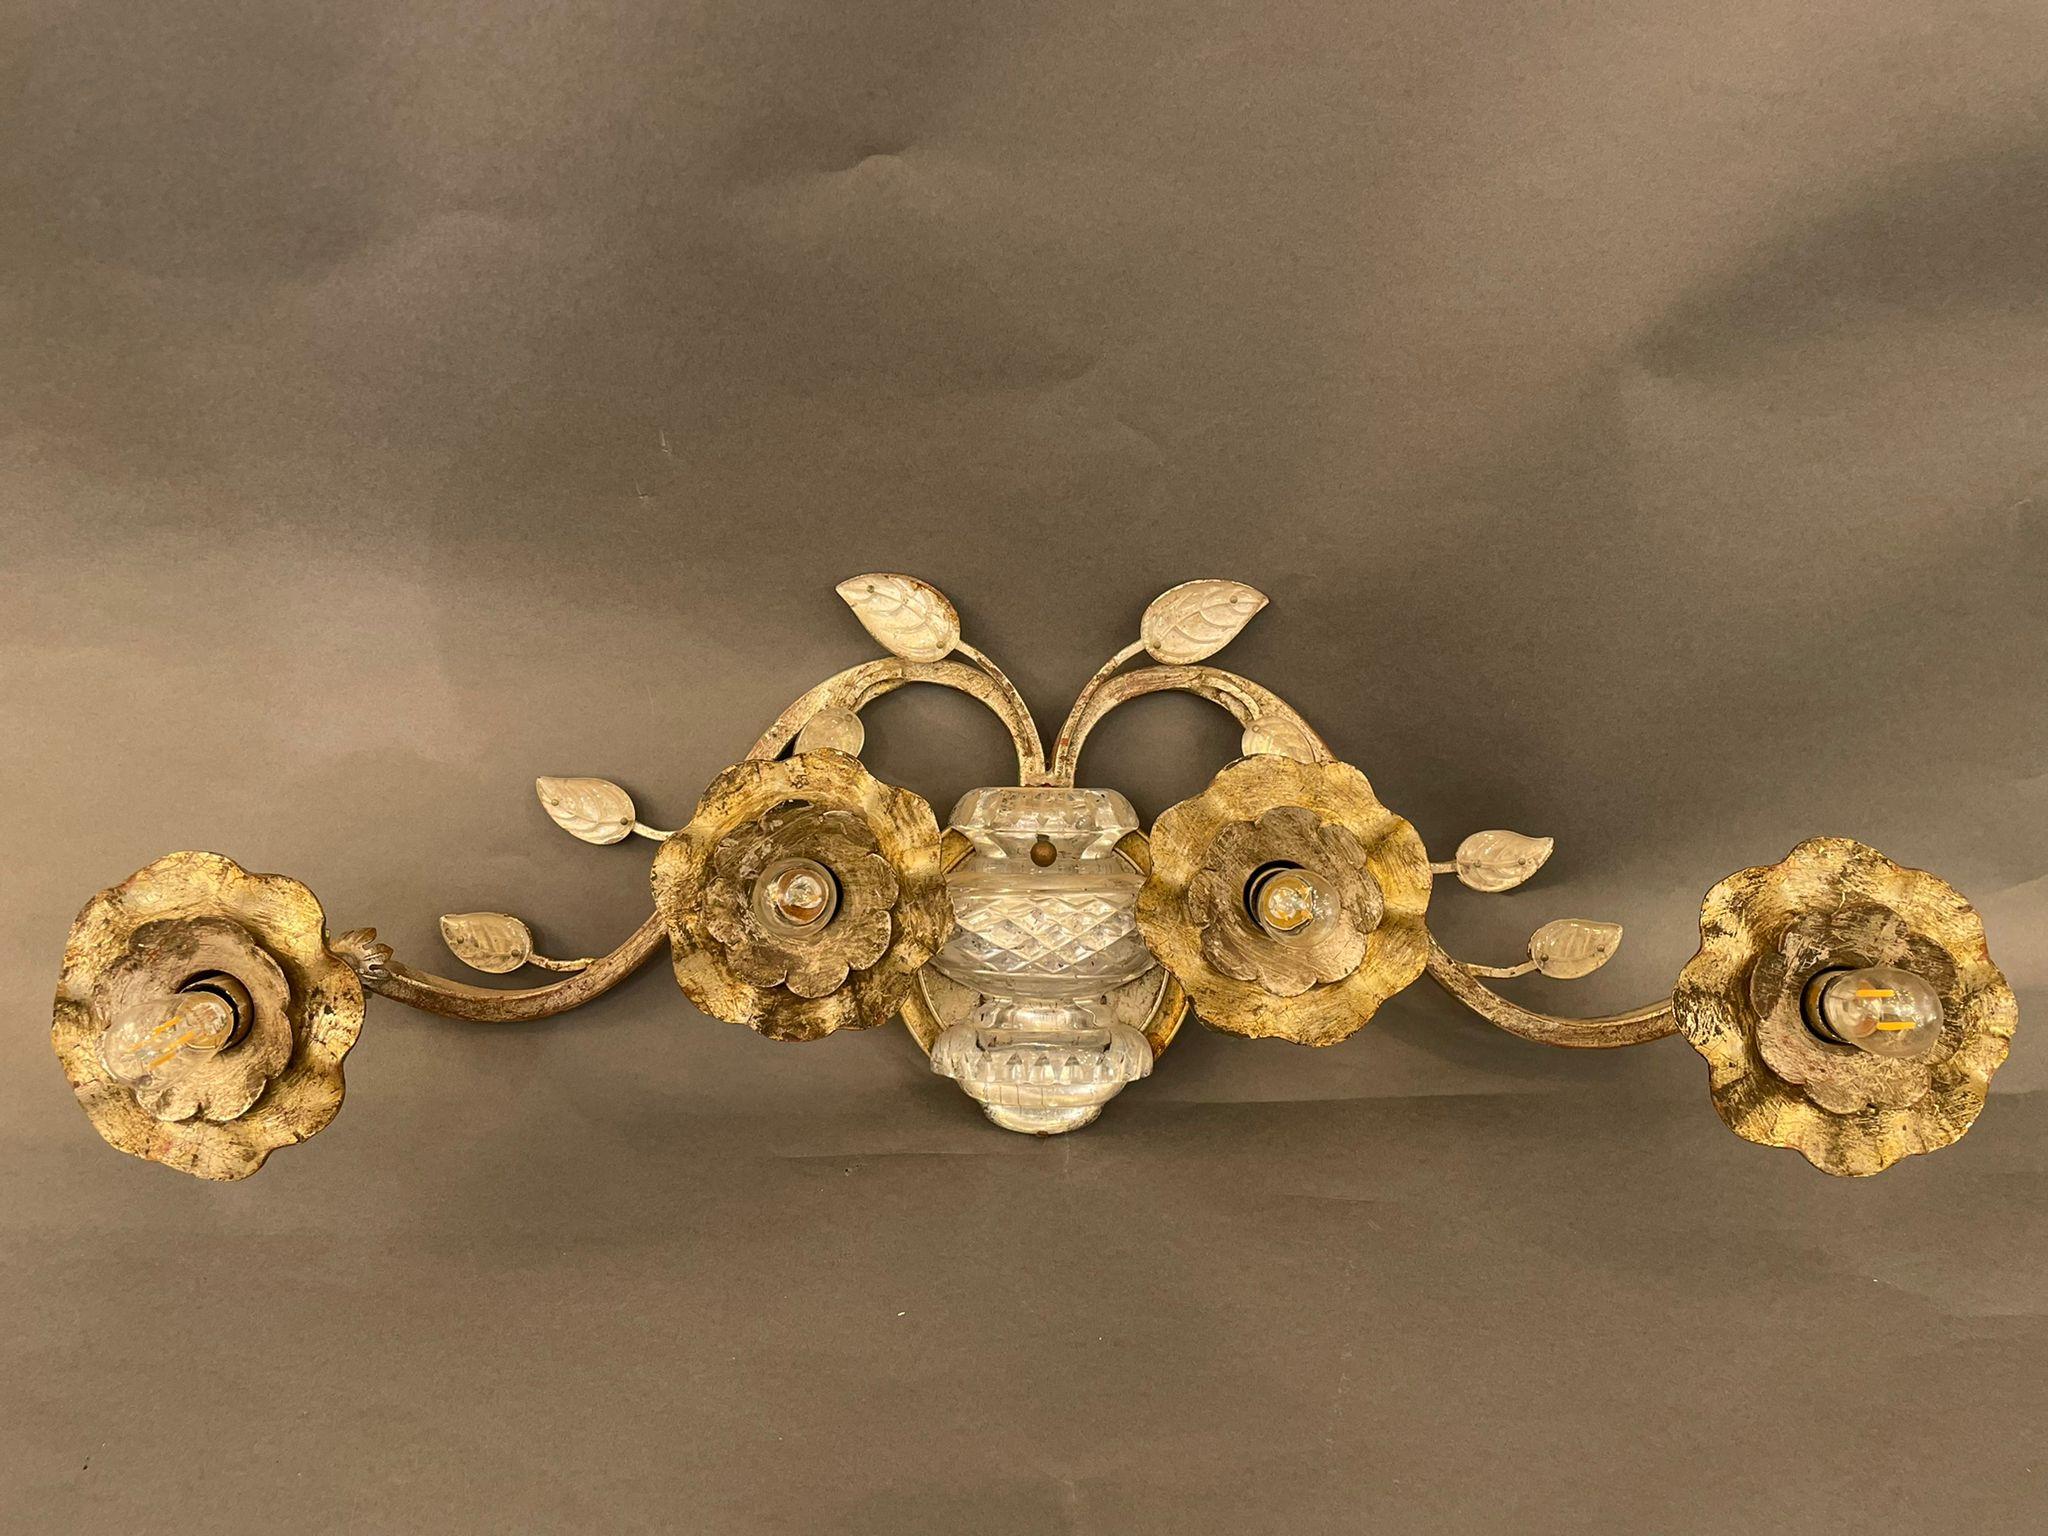 A large French silver Wrought Iron sconces attributed to Maison Bagués. Silver iron painted finish, adorned with flowers and leaves, the side flowers are directional. France 1940s

In excellent vintage condition.